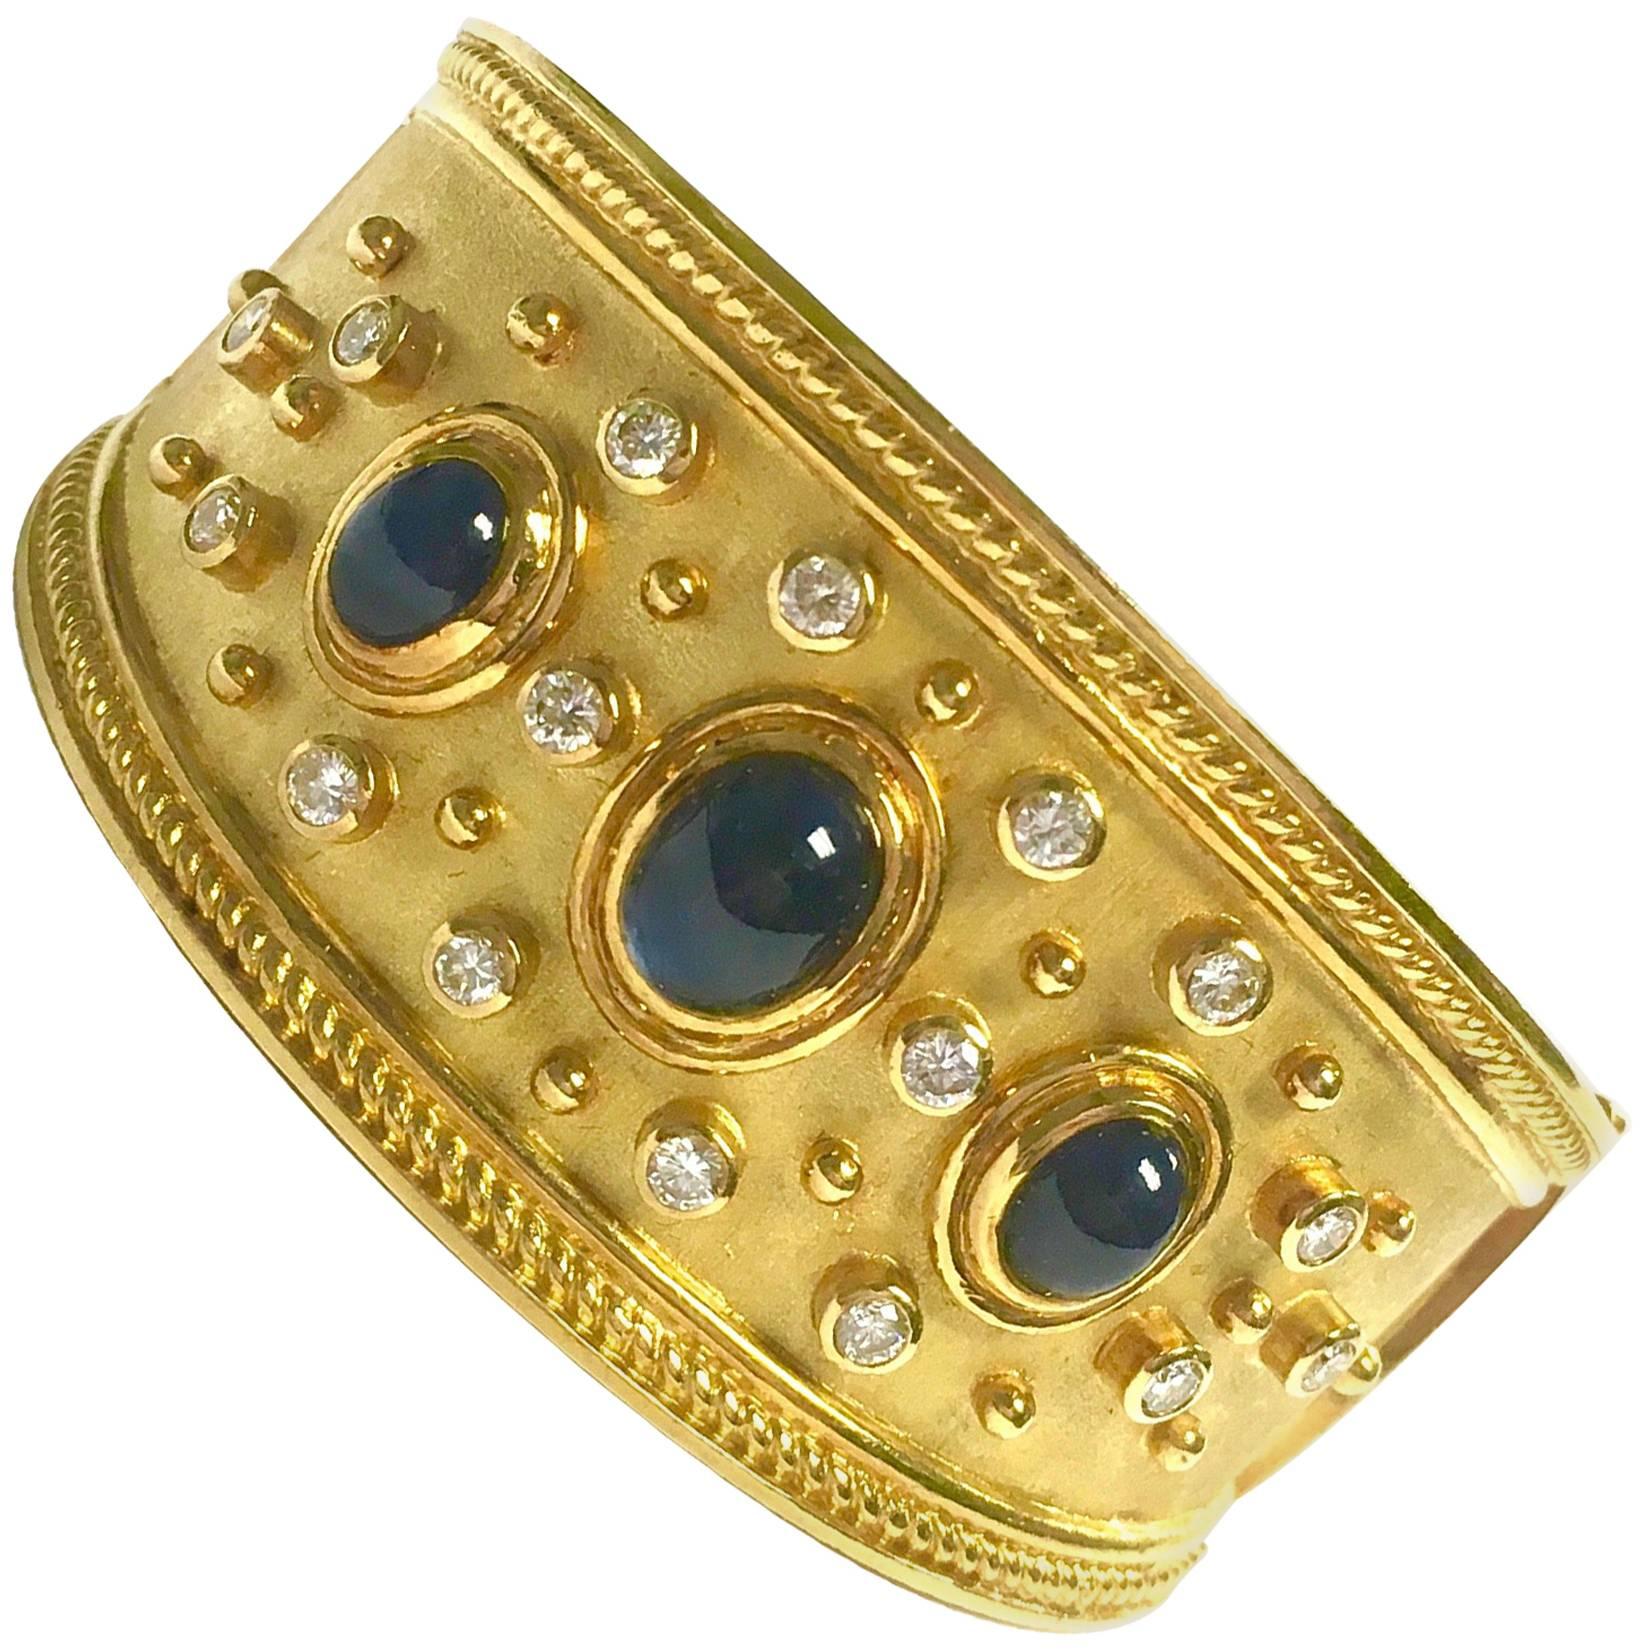 Gorgeous 19K yellow gold hinged bangle bracelet featuring three bezel set oval cabochon cut blue sapphires, approximate total weight 10ct., surrounded by sixteen bezel set round brilliant cut diamonds, approximate total weight: 1.50ct. Color: G-H,